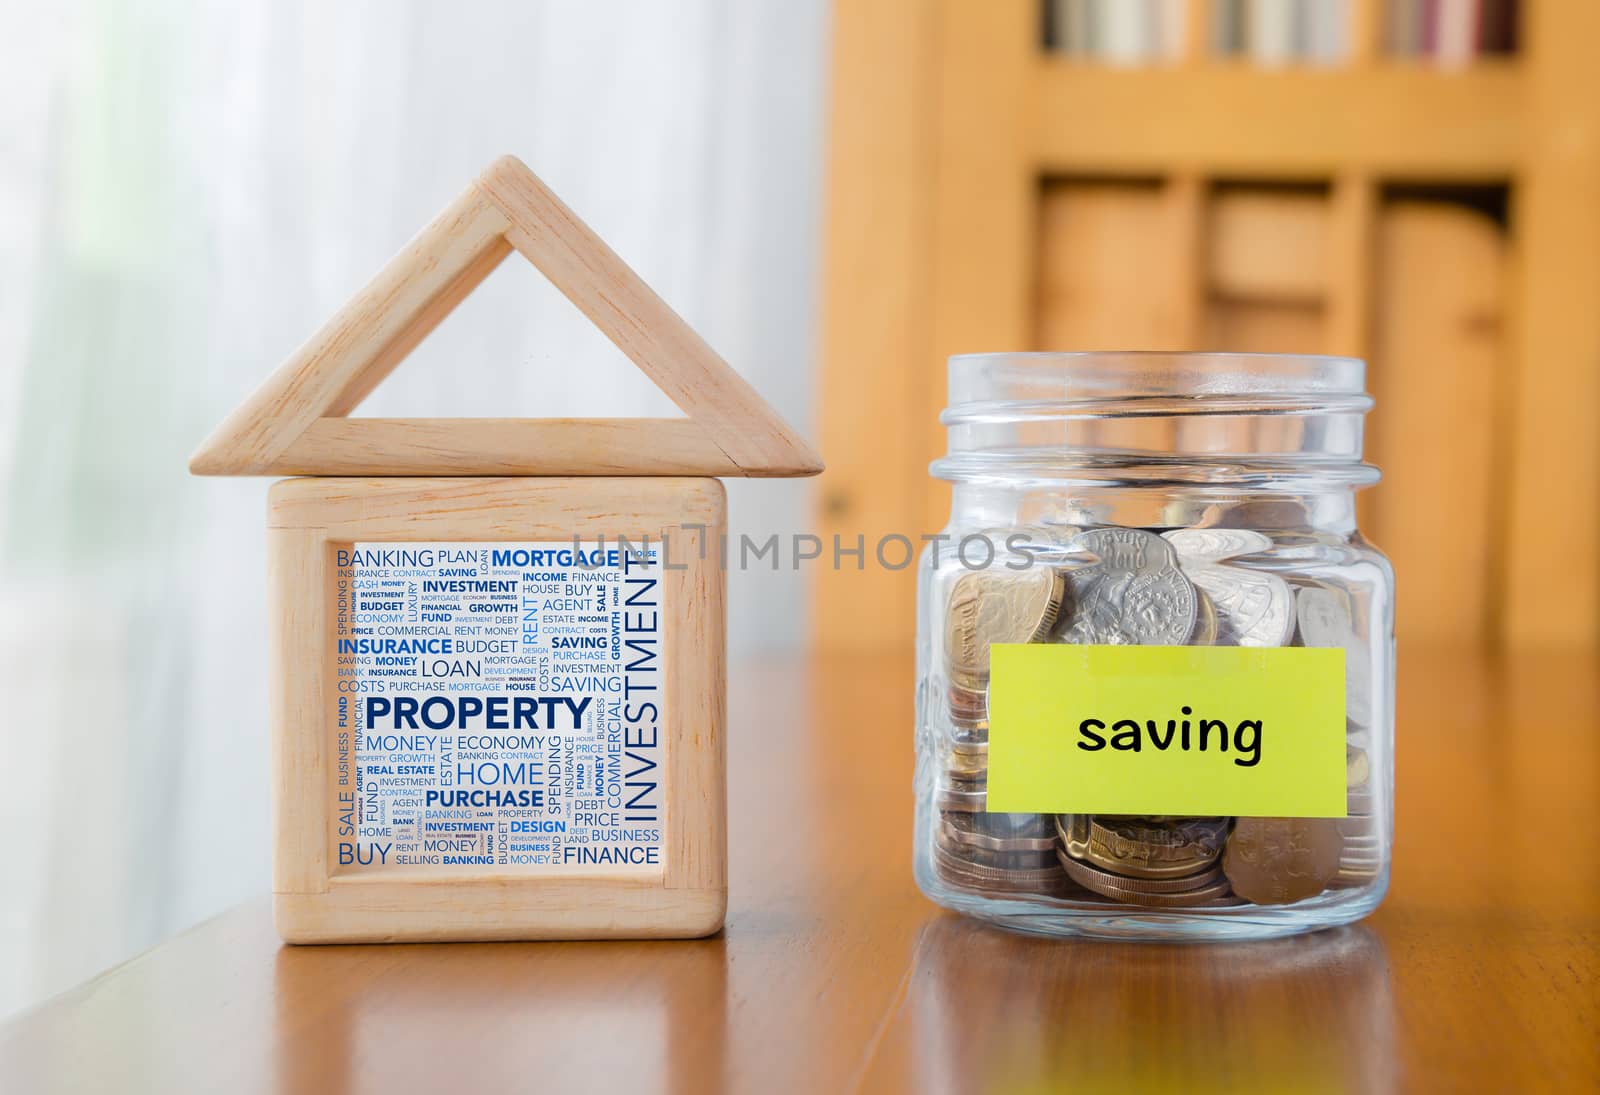 Saving label on money jar and wooden home  blocks with investment property word cloud